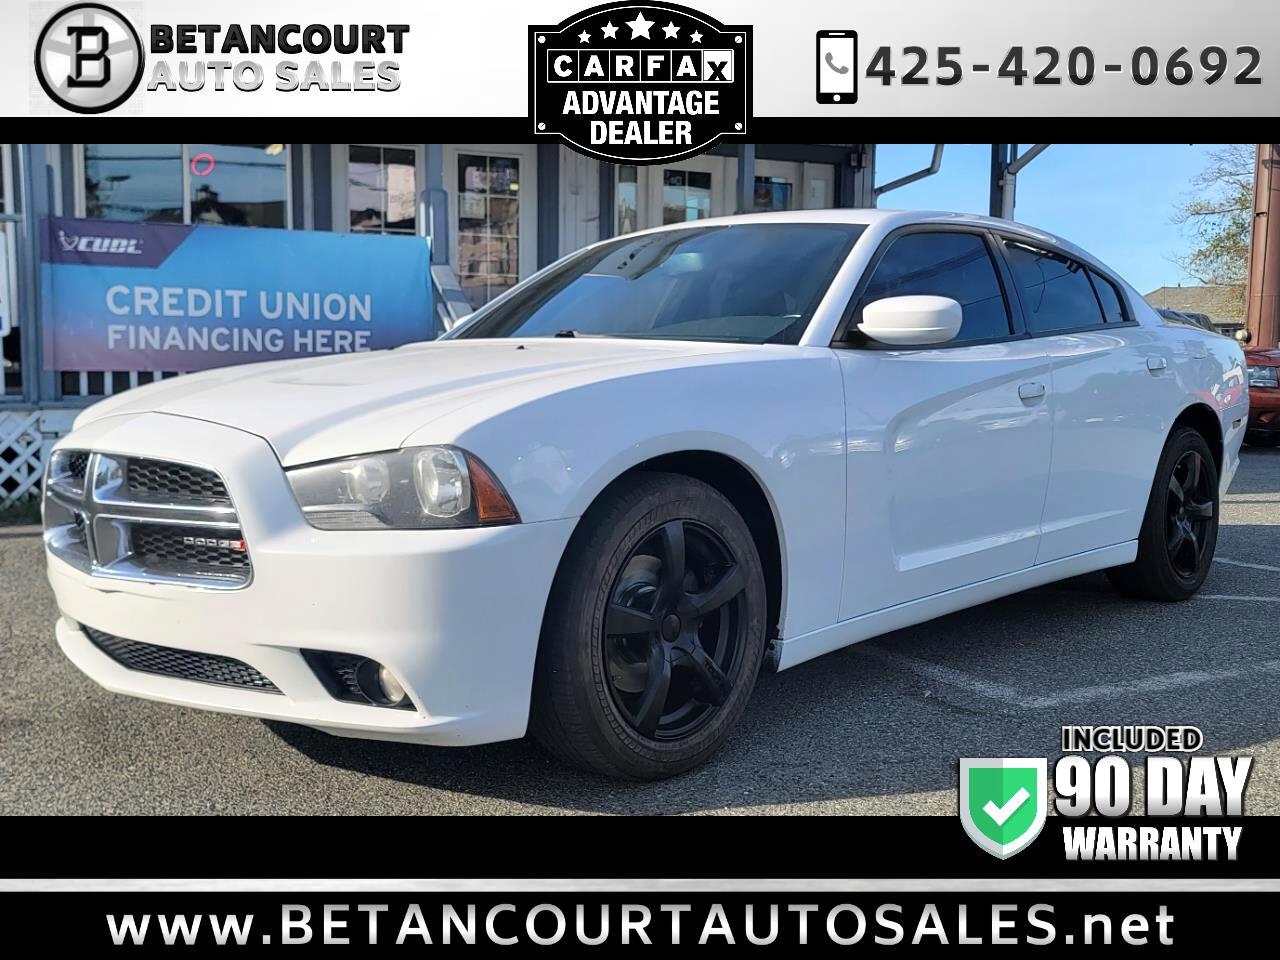 2013 Dodge Charger 4dr Sdn SXT RWD